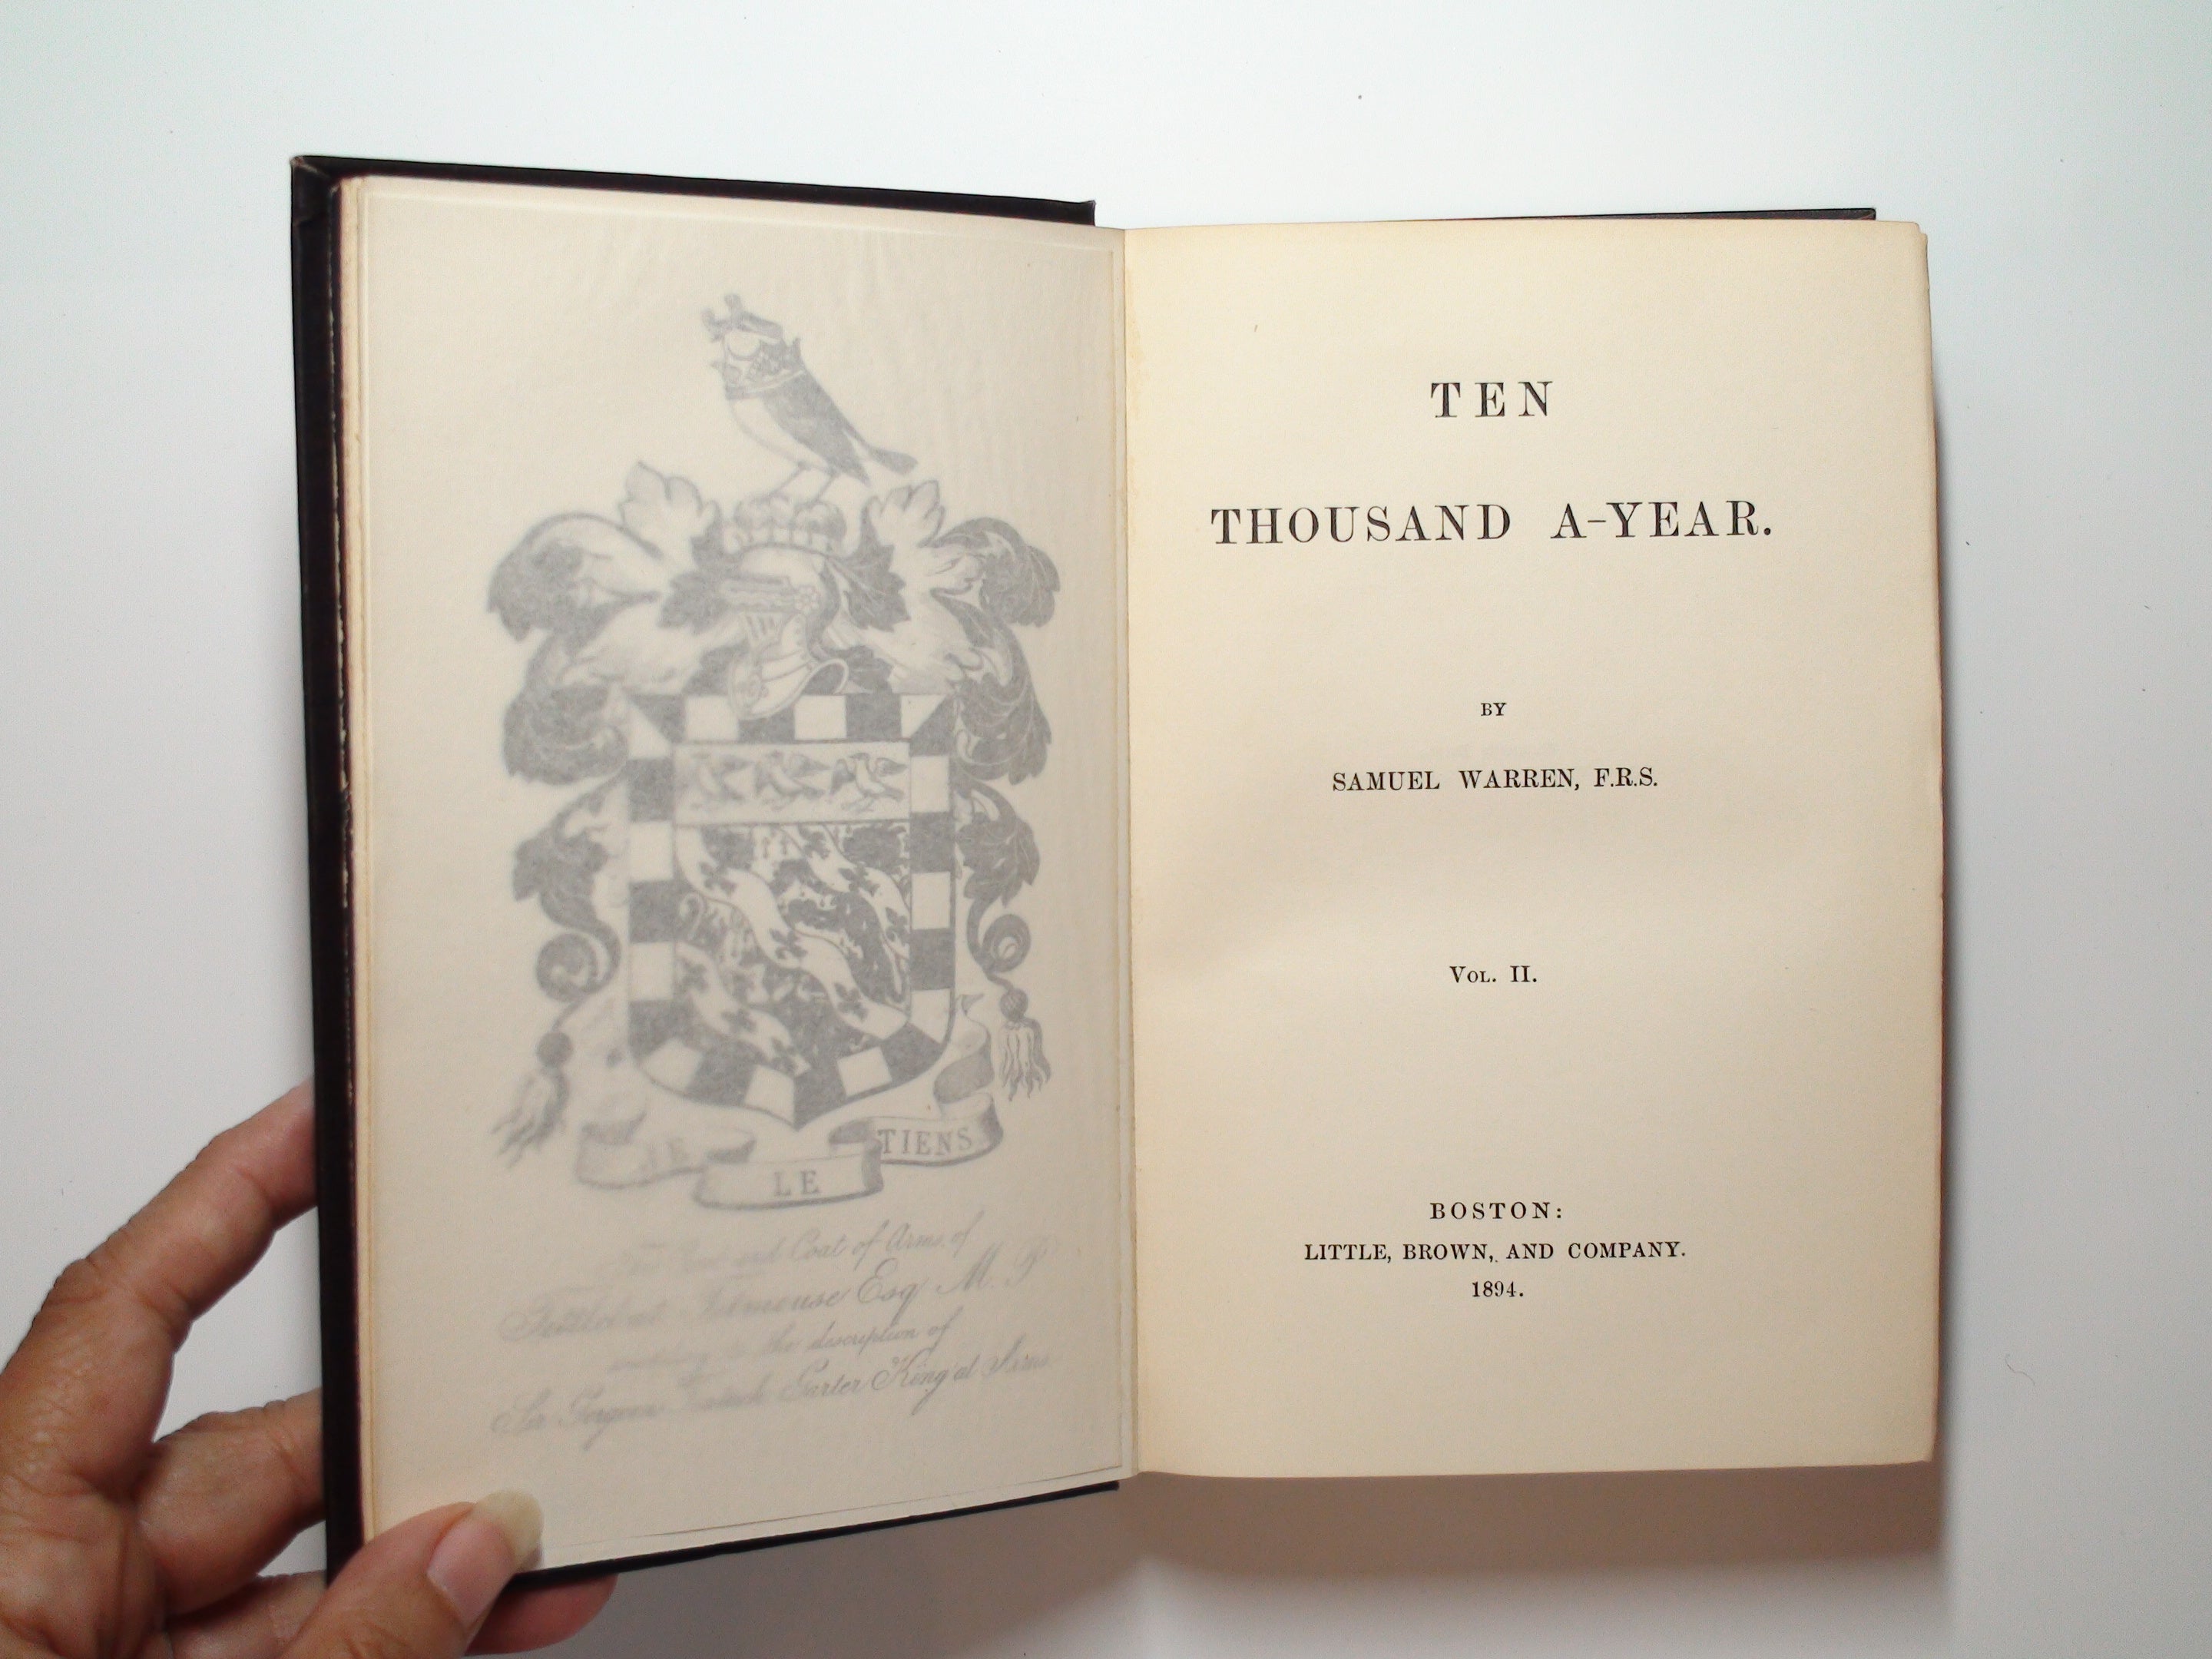 Ten Thousand A Year, by Samuel Warren, Vol I and II ONLY of a 3 Vol Set, 1894